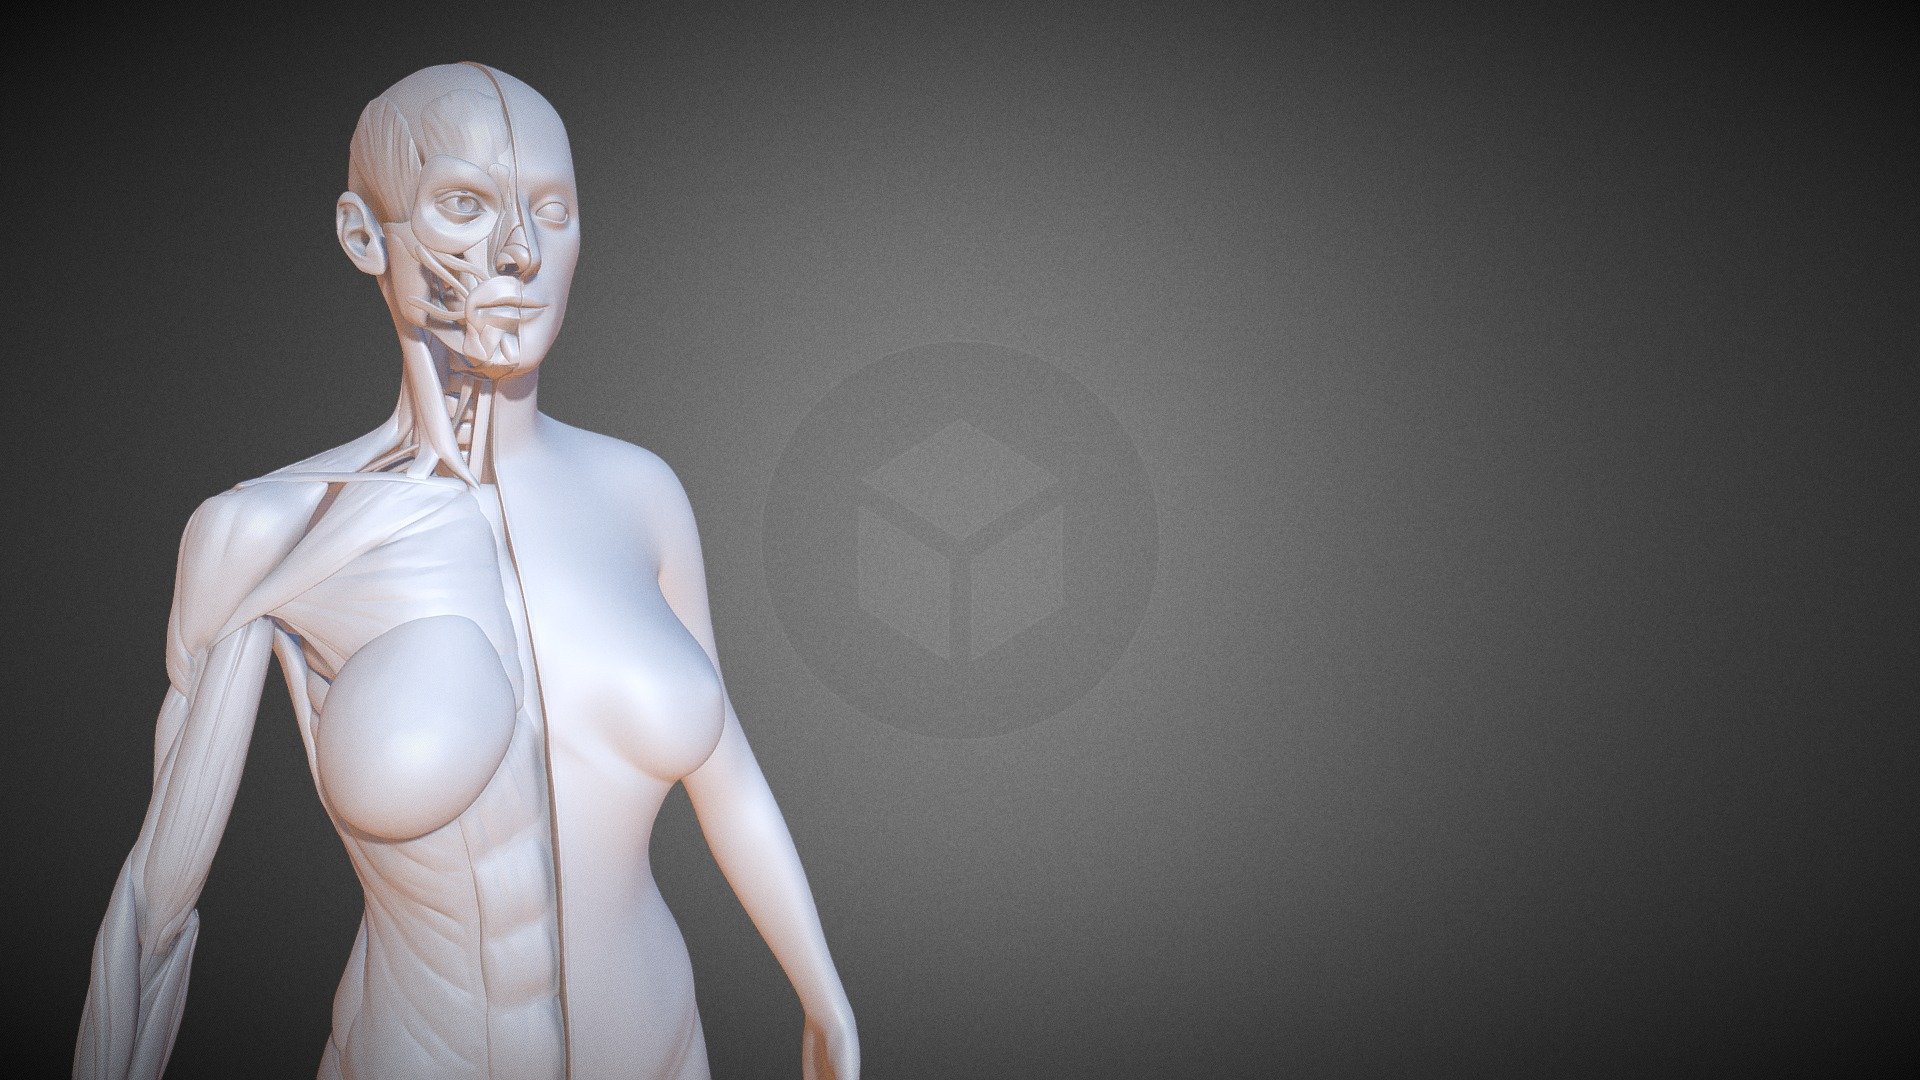 Female muscle Anatomy  3d print model ready to use

Print Size In inch

x 1.79 inch

y 5.00 inch

z 1.42 inch

Polycount

Vertex 915178 Face 1829590

File format

ZTL Obj Fbx Stl

We greatly appreciate you choosing our 3D models and hope they will be of use. We look forward to continuously dealing with you.

If you like this collection don't forget to rate it please - Enjoy

Hope you like it! - Female Muscle Anatomy3d print - Buy Royalty Free 3D model by Mikle (@cgamit786) 3d model